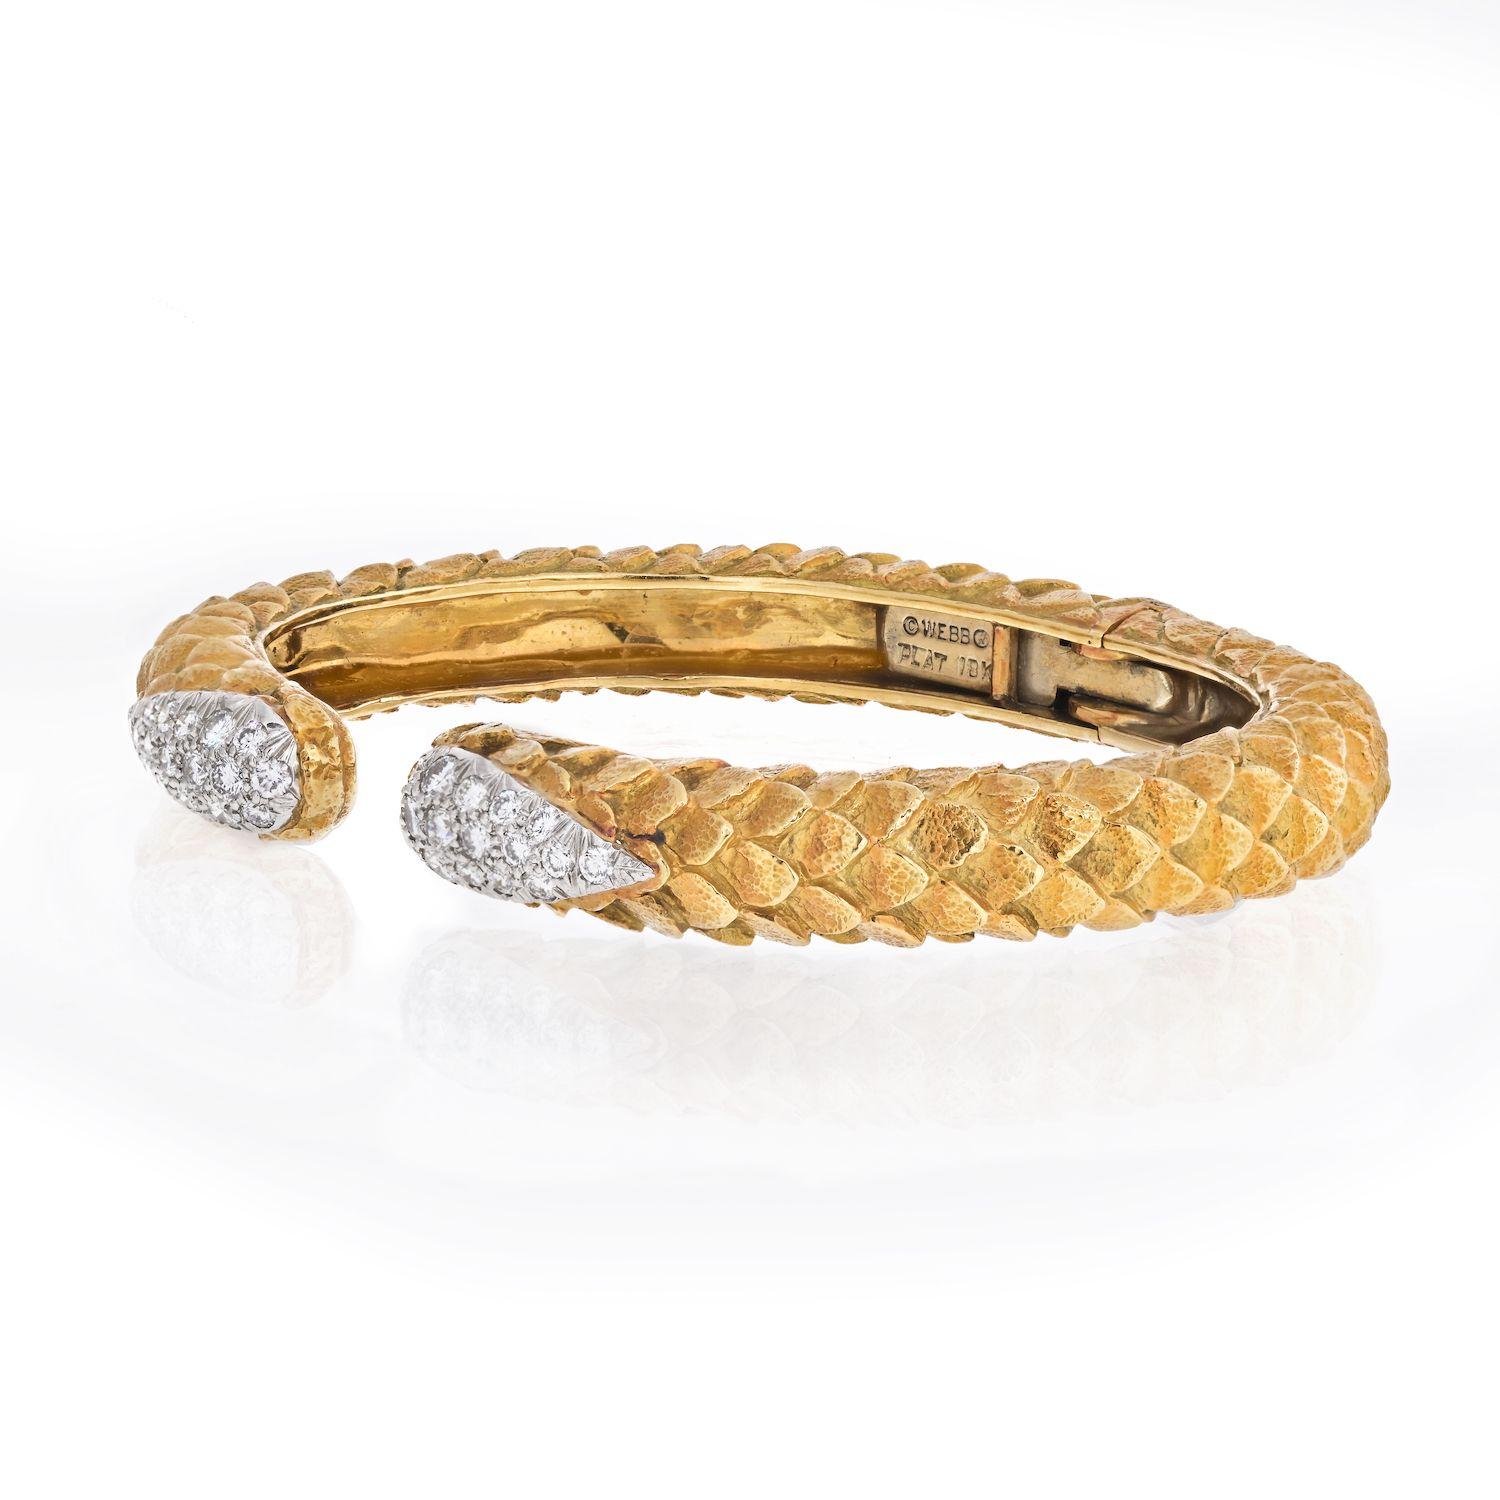 David Webb 18K Yellow Gold Diamond Tip Textured Bangle Bracelet.
Wrist size: 6.5
Diamond Weight: 1.60cts (approx)
Excellent condition. 
